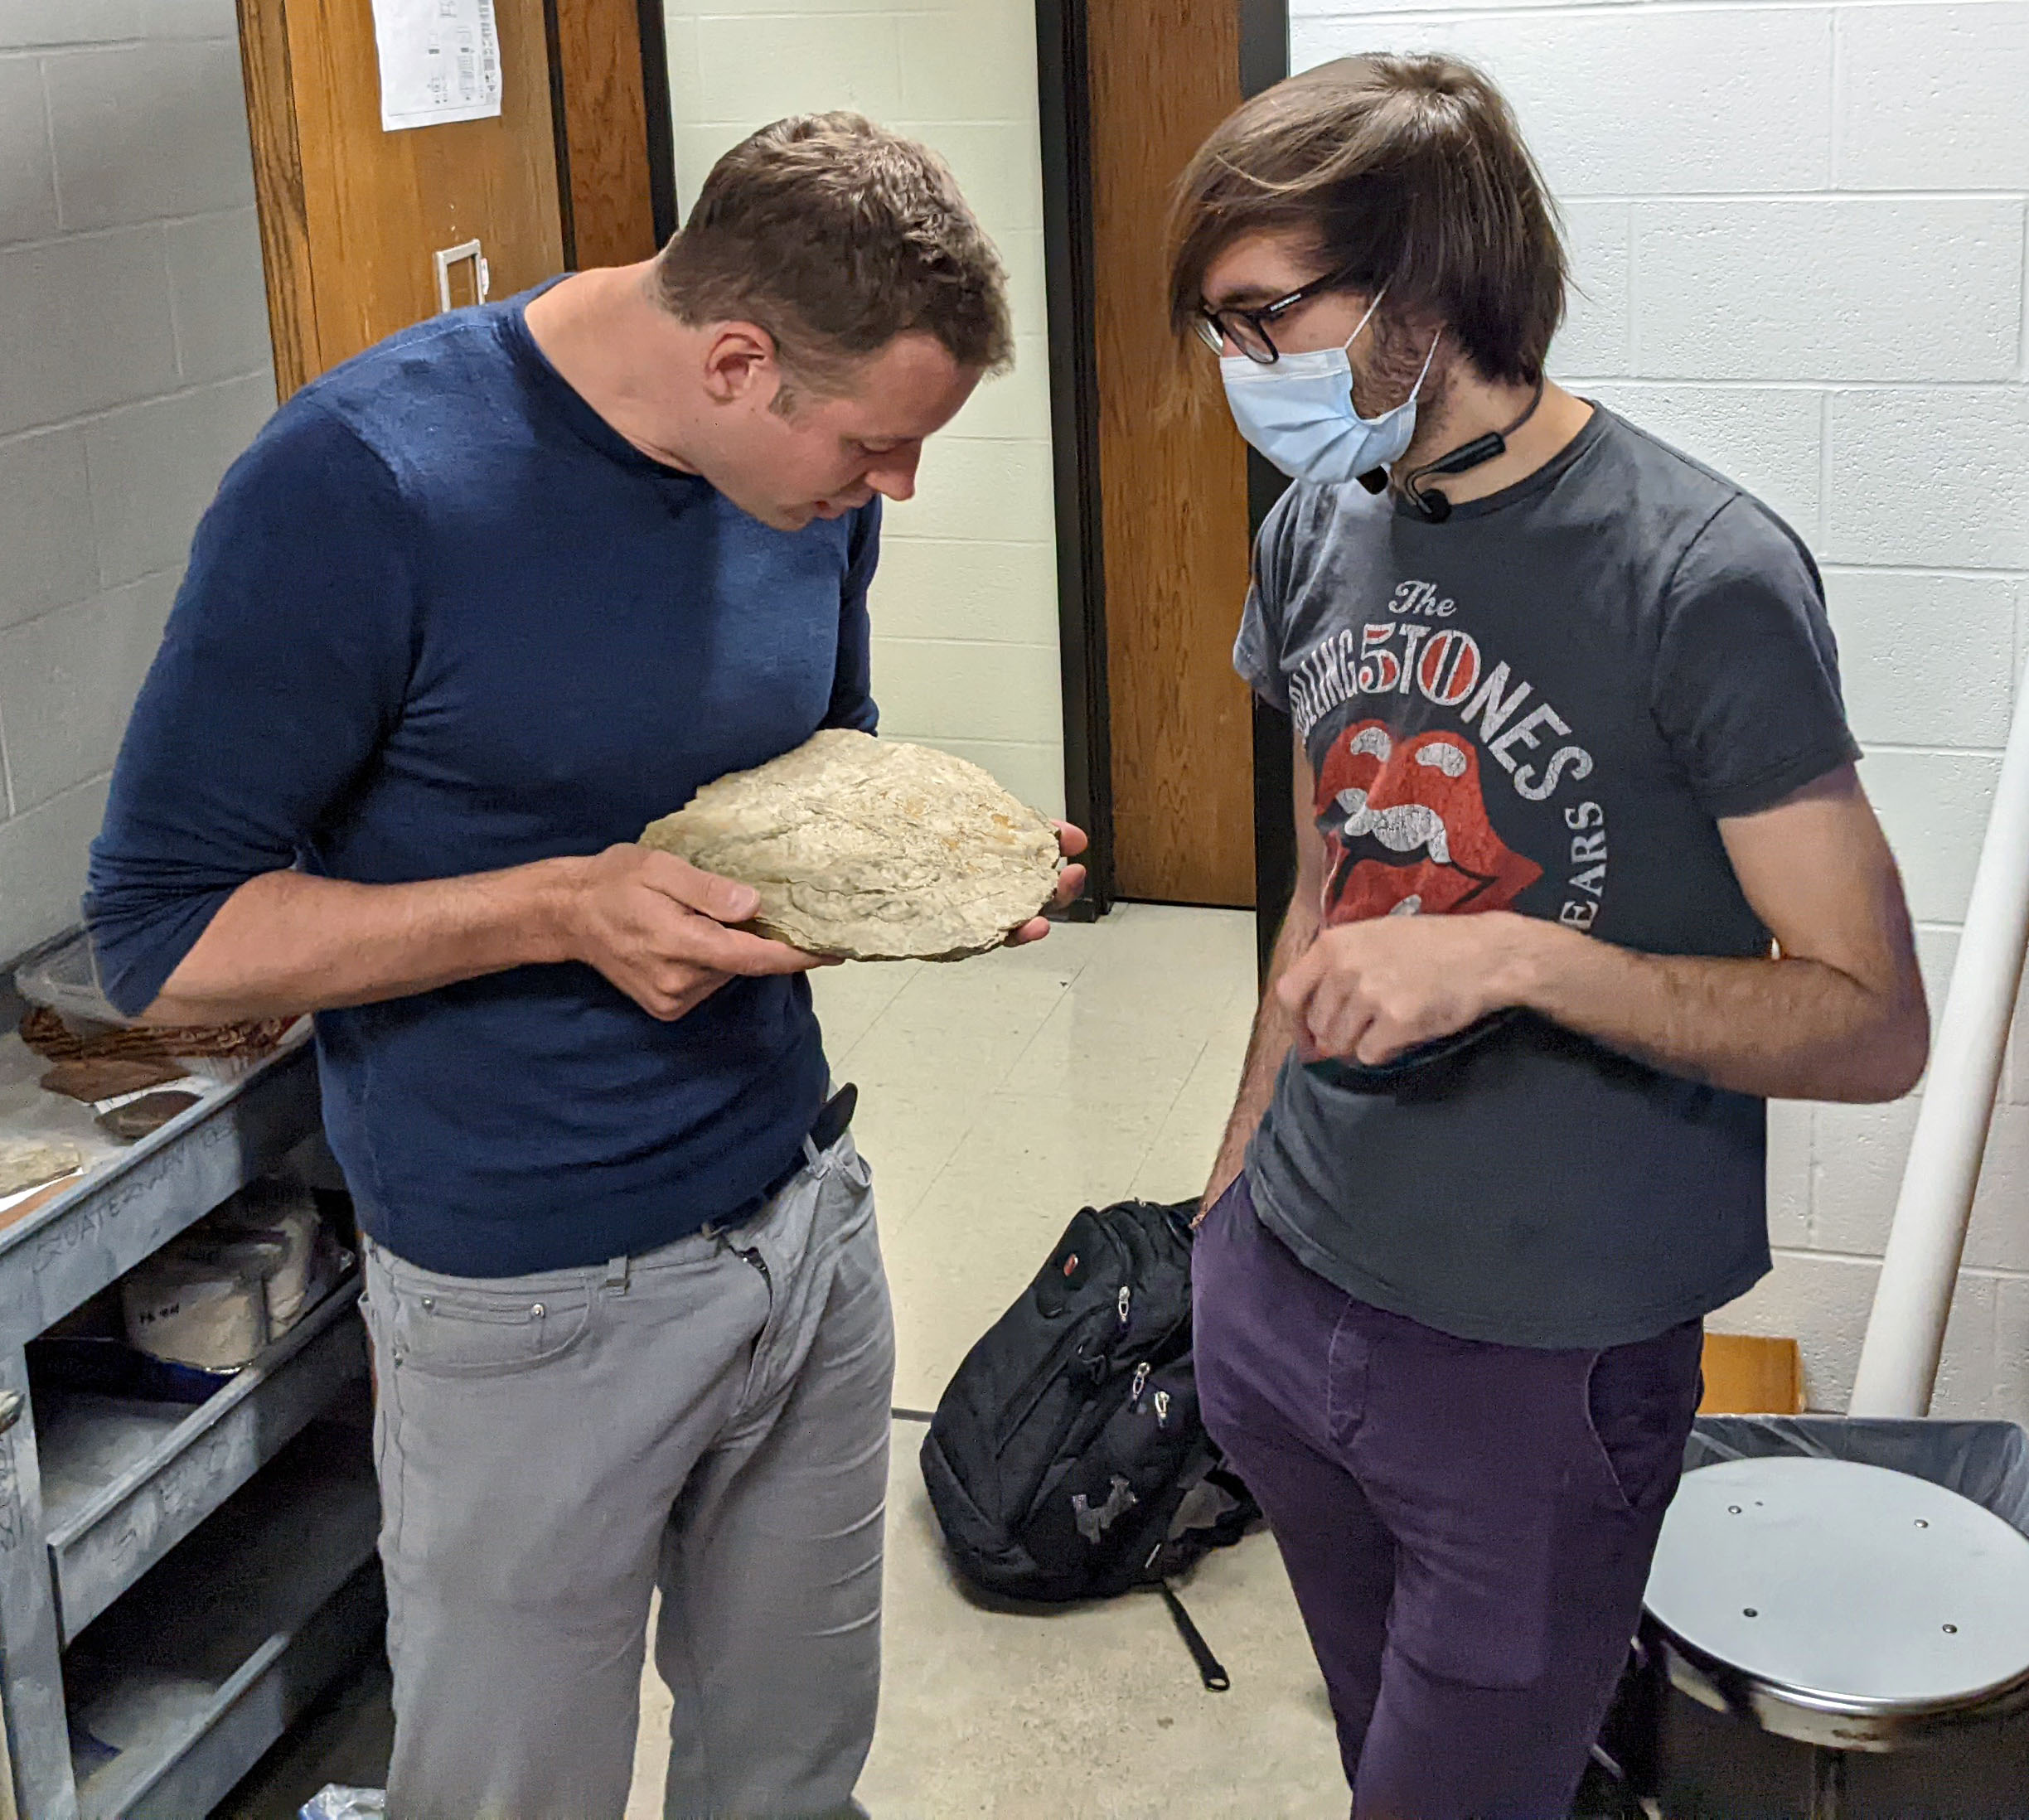 Simon Darroch in a blue shirt holding a slab of fossil explaining something very interesting to undergraduate Andrei Olaru wearing a stylish rolling stones t-shirt